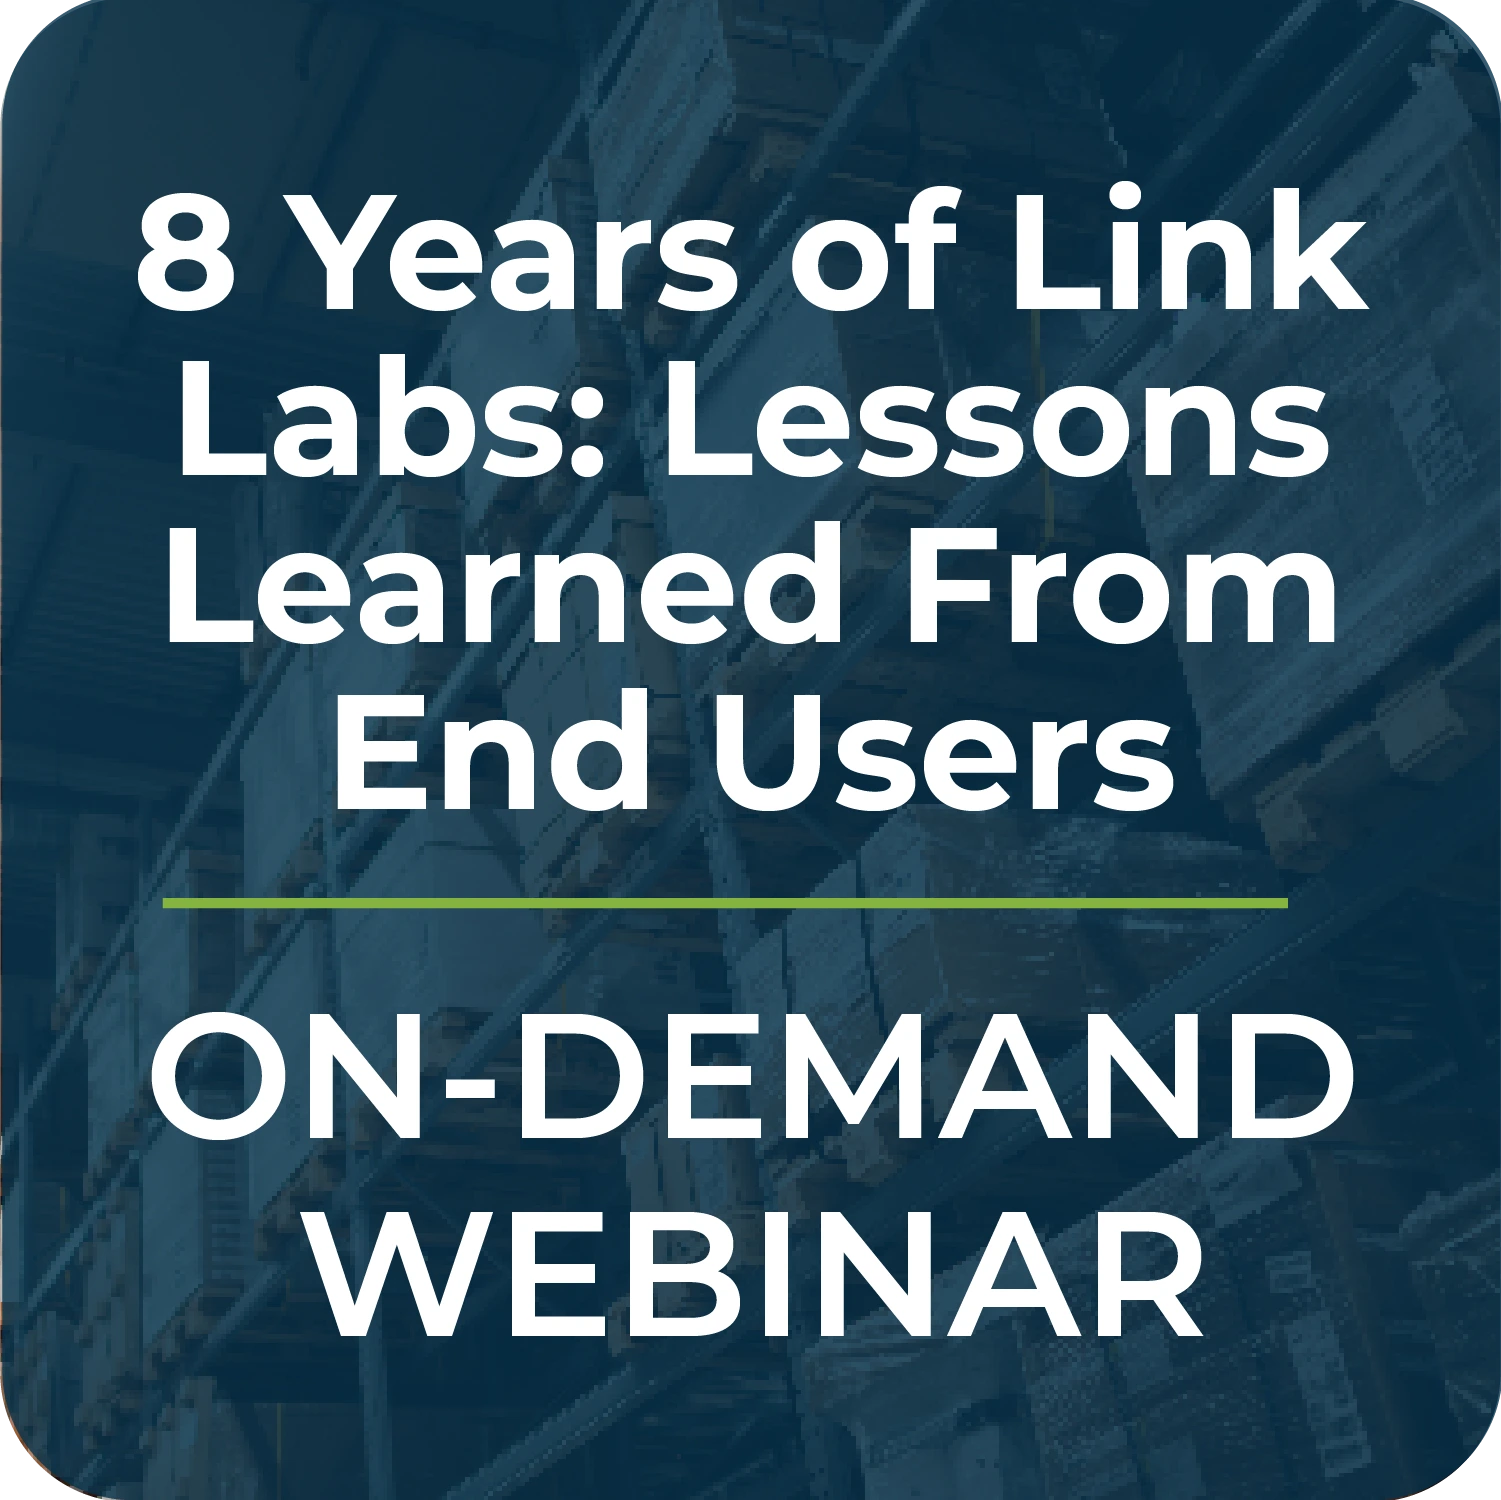 8 Years of Link Labs: Lessons Learned from End Users